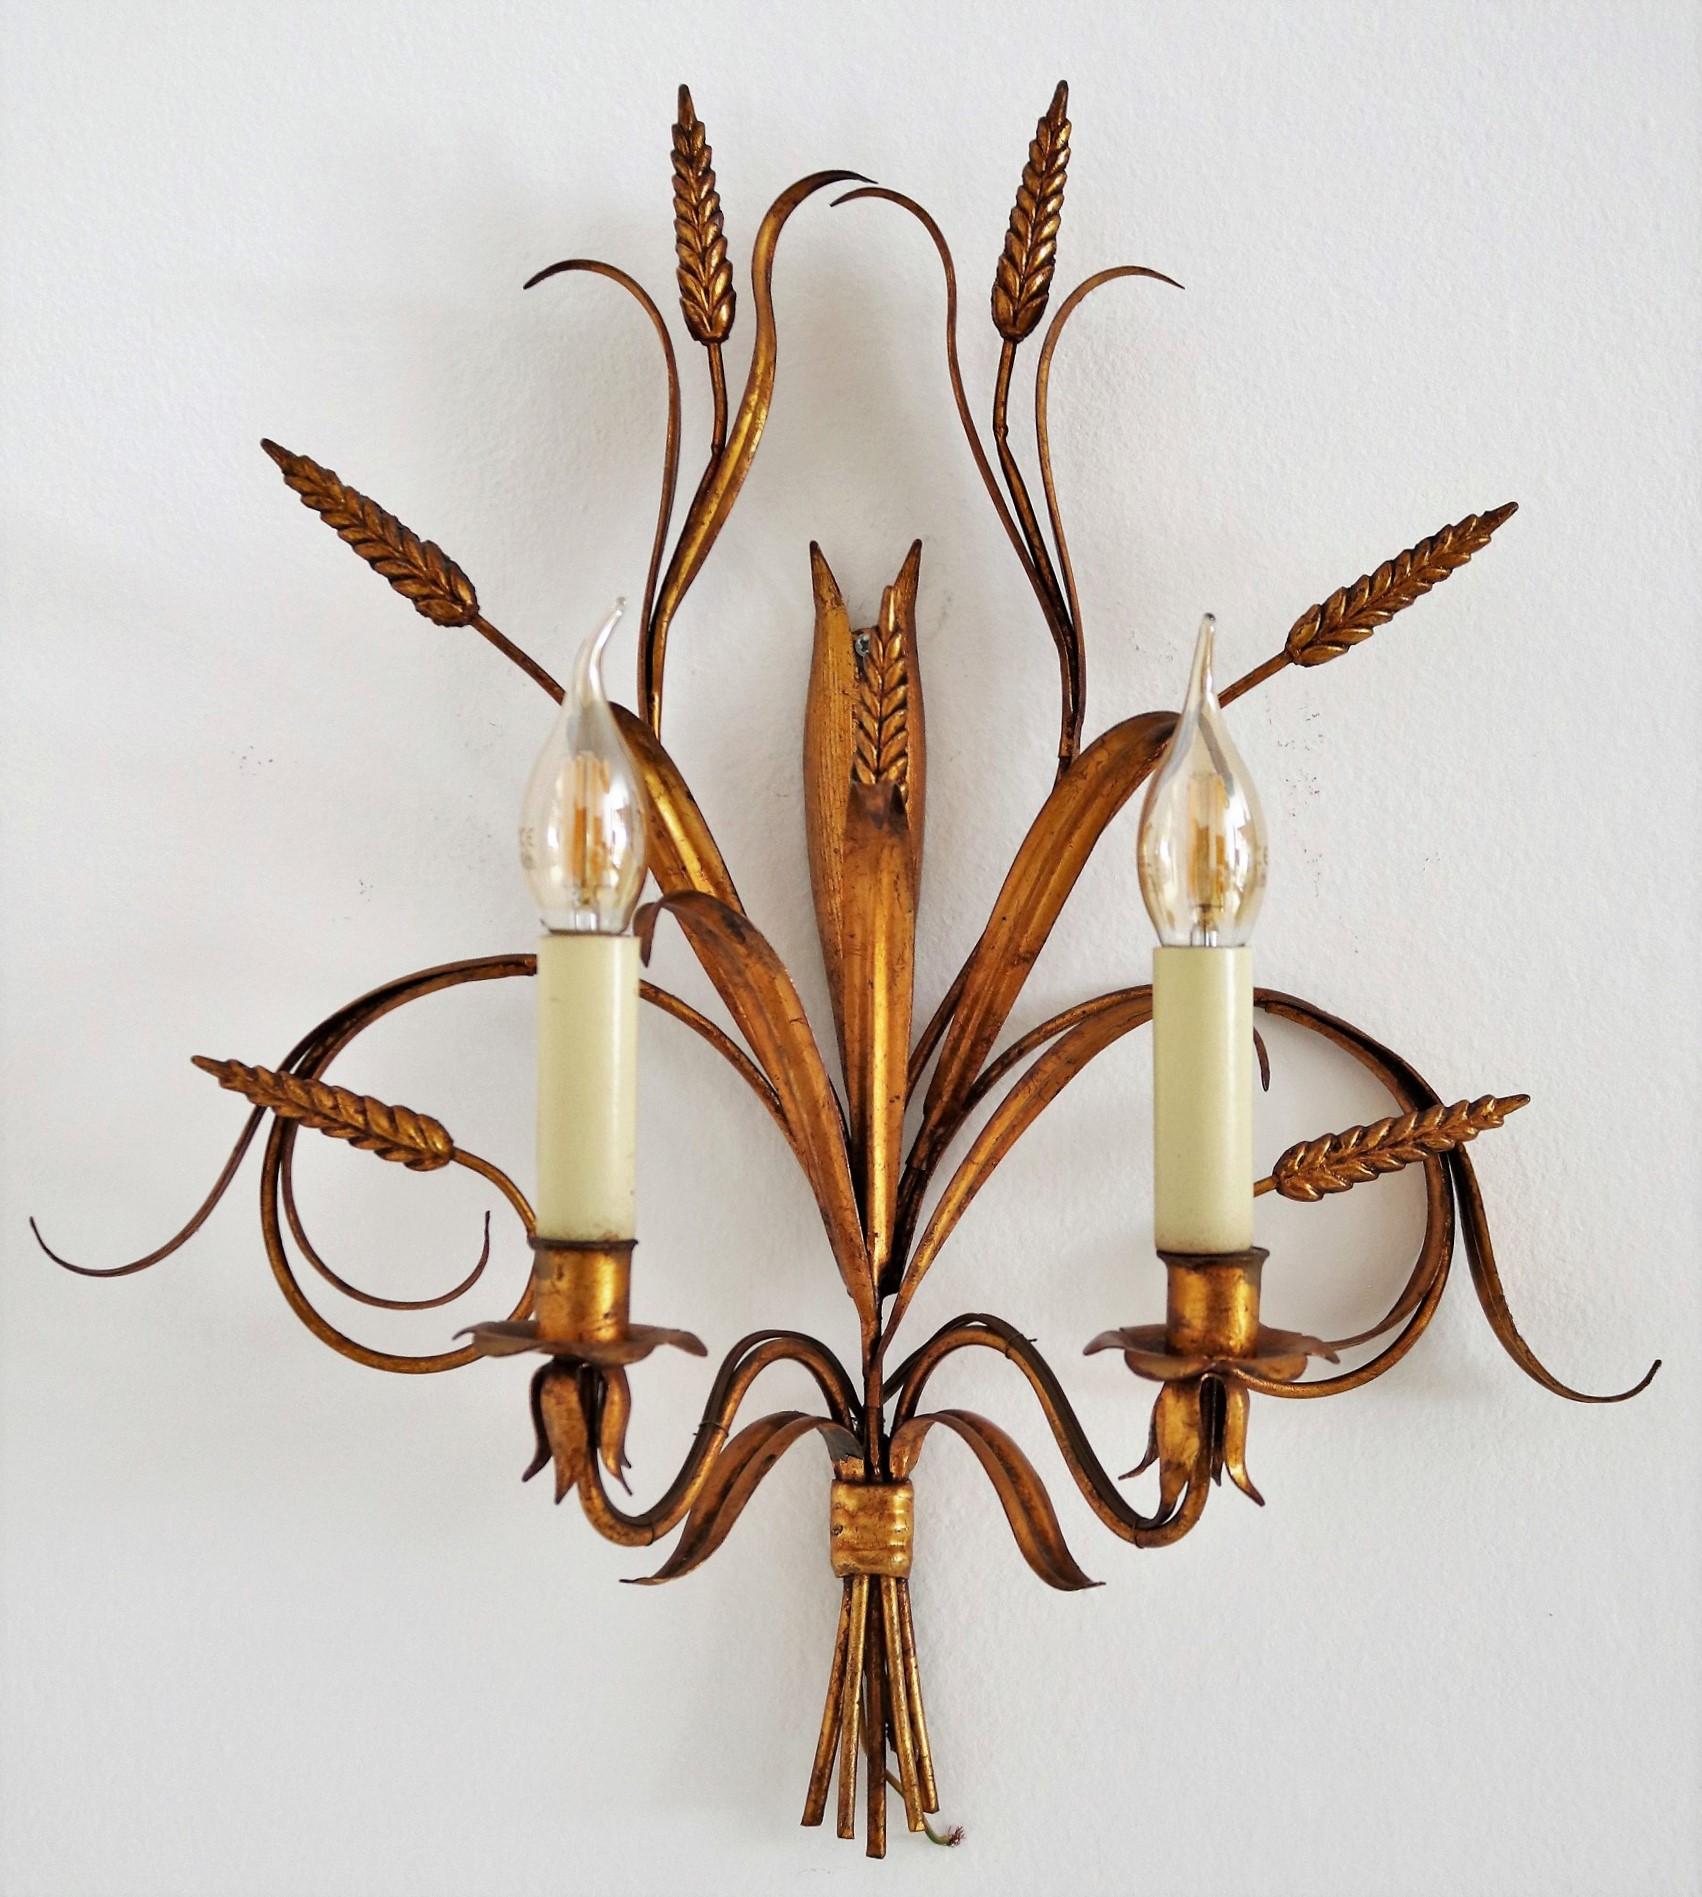 Italian Midcentury Gilt Tole Wall Sconces with Wheat Sheaf, 1950s, Set of Five For Sale 11